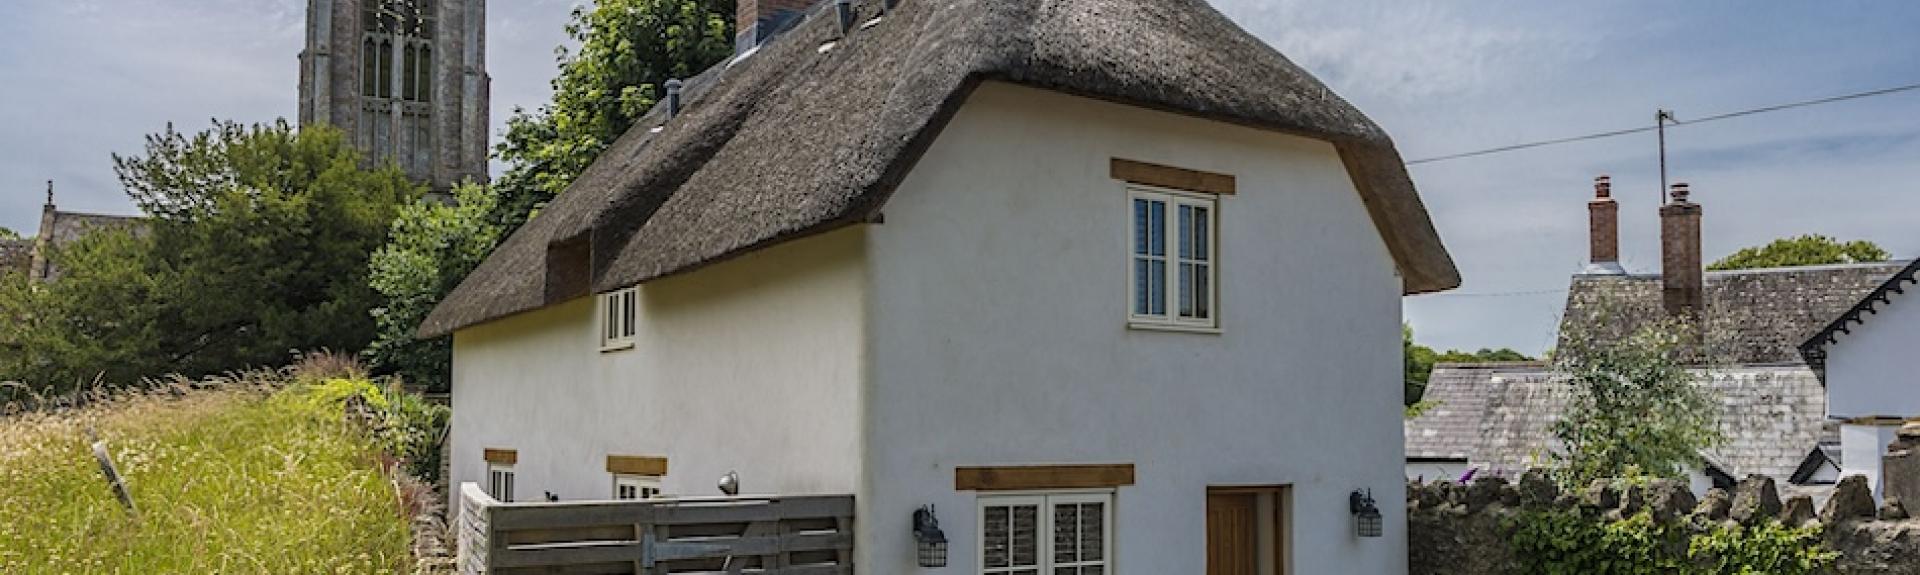 Exterior of a thatched village cottage in Dorset.